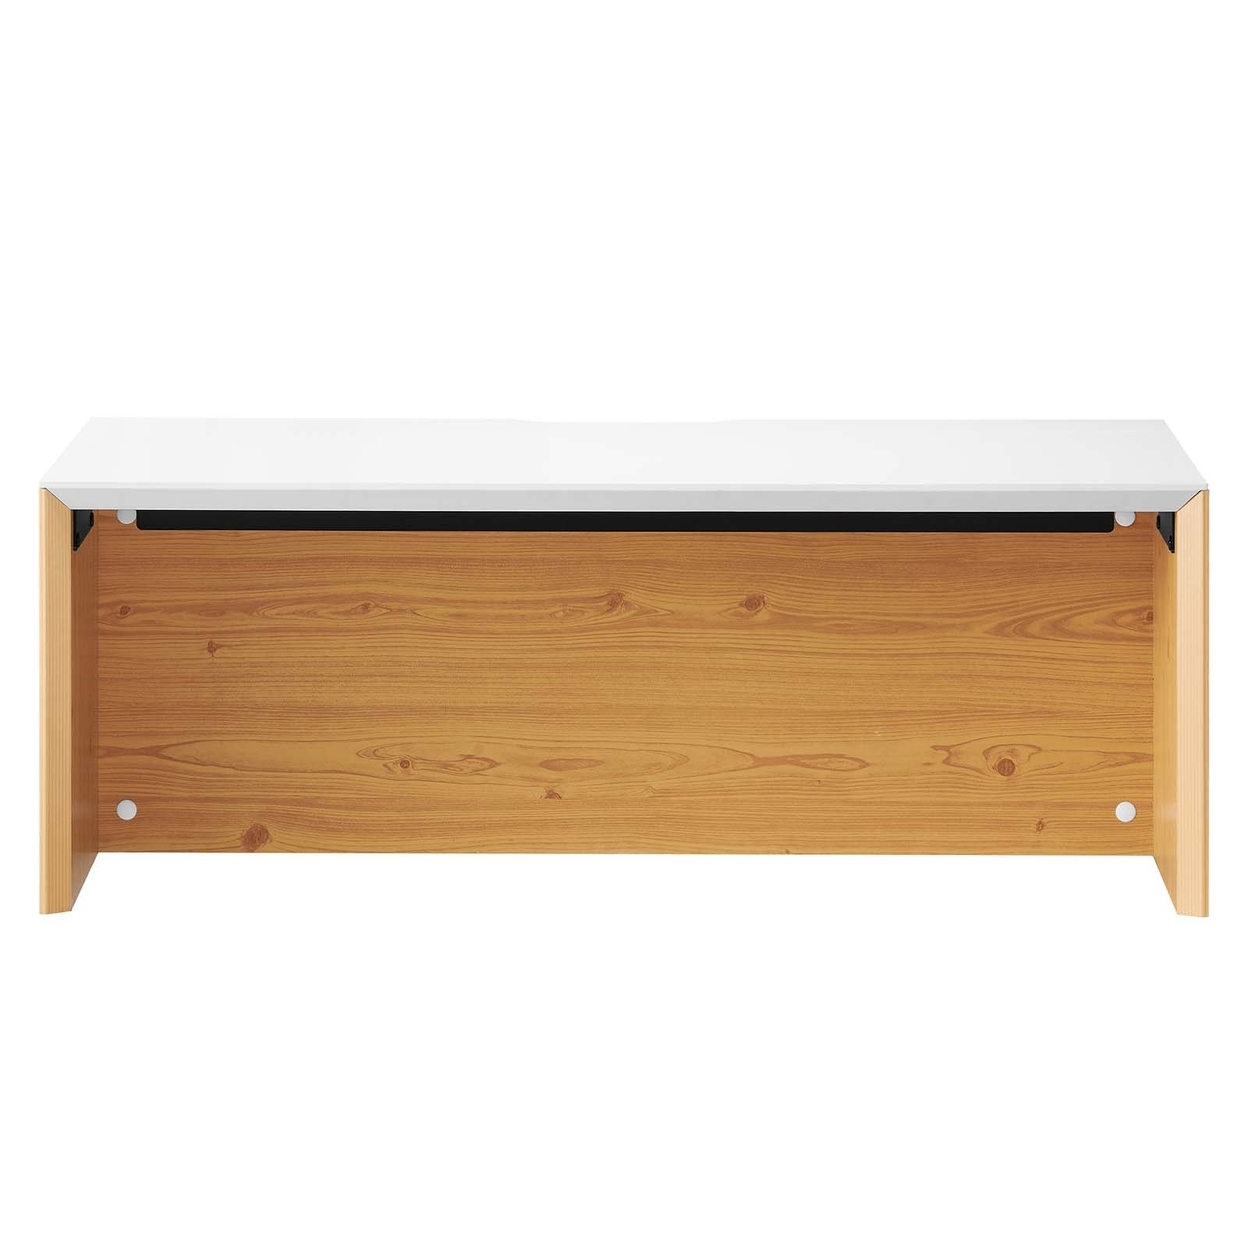 Kinetic 38 Wall-Mount Office Desk, White Natural